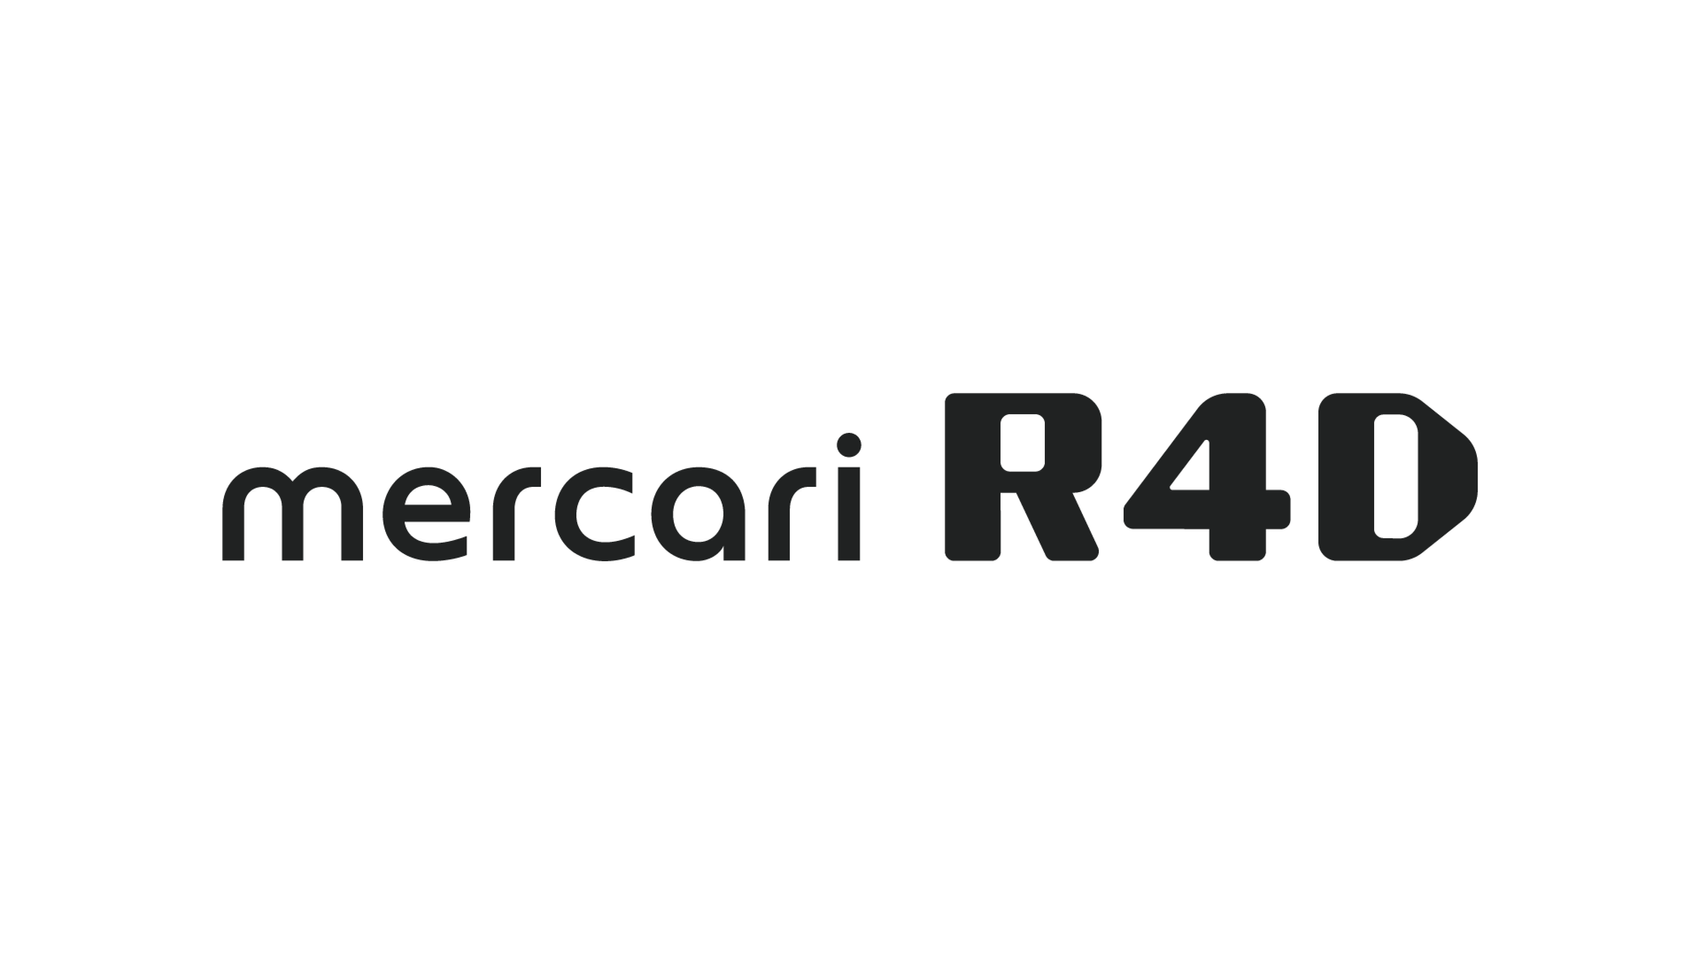 Mercari R4D Bridges Industry and Academia by Starting a Personnel Exchange with Osaka University Research Center on ELSI